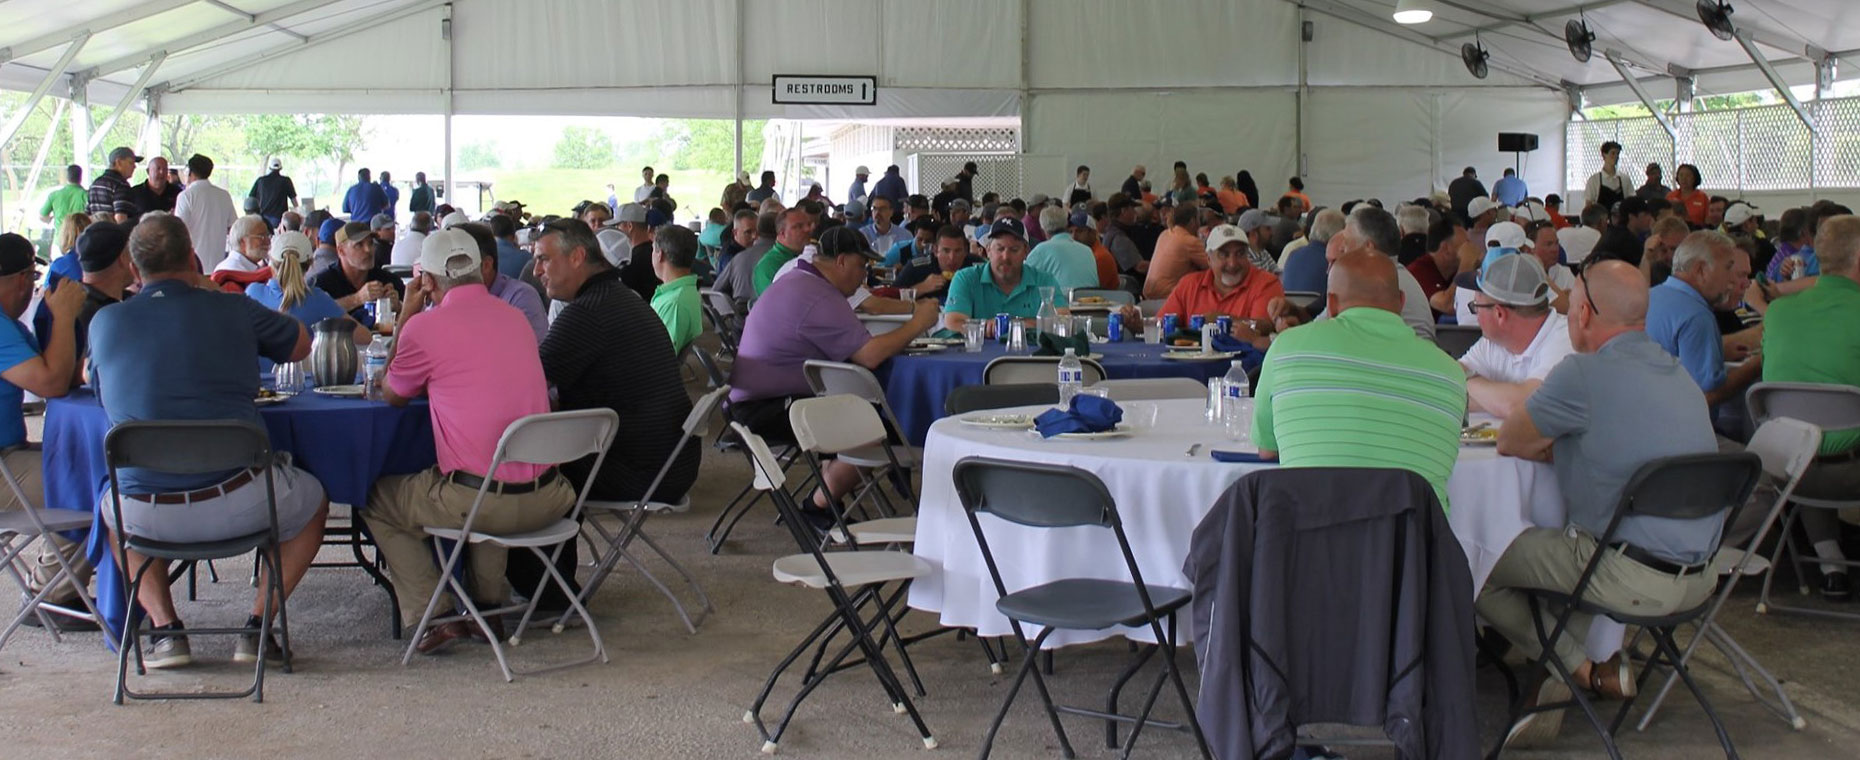 People sitting enjoying The TCC Annual Dinner Golf Outing